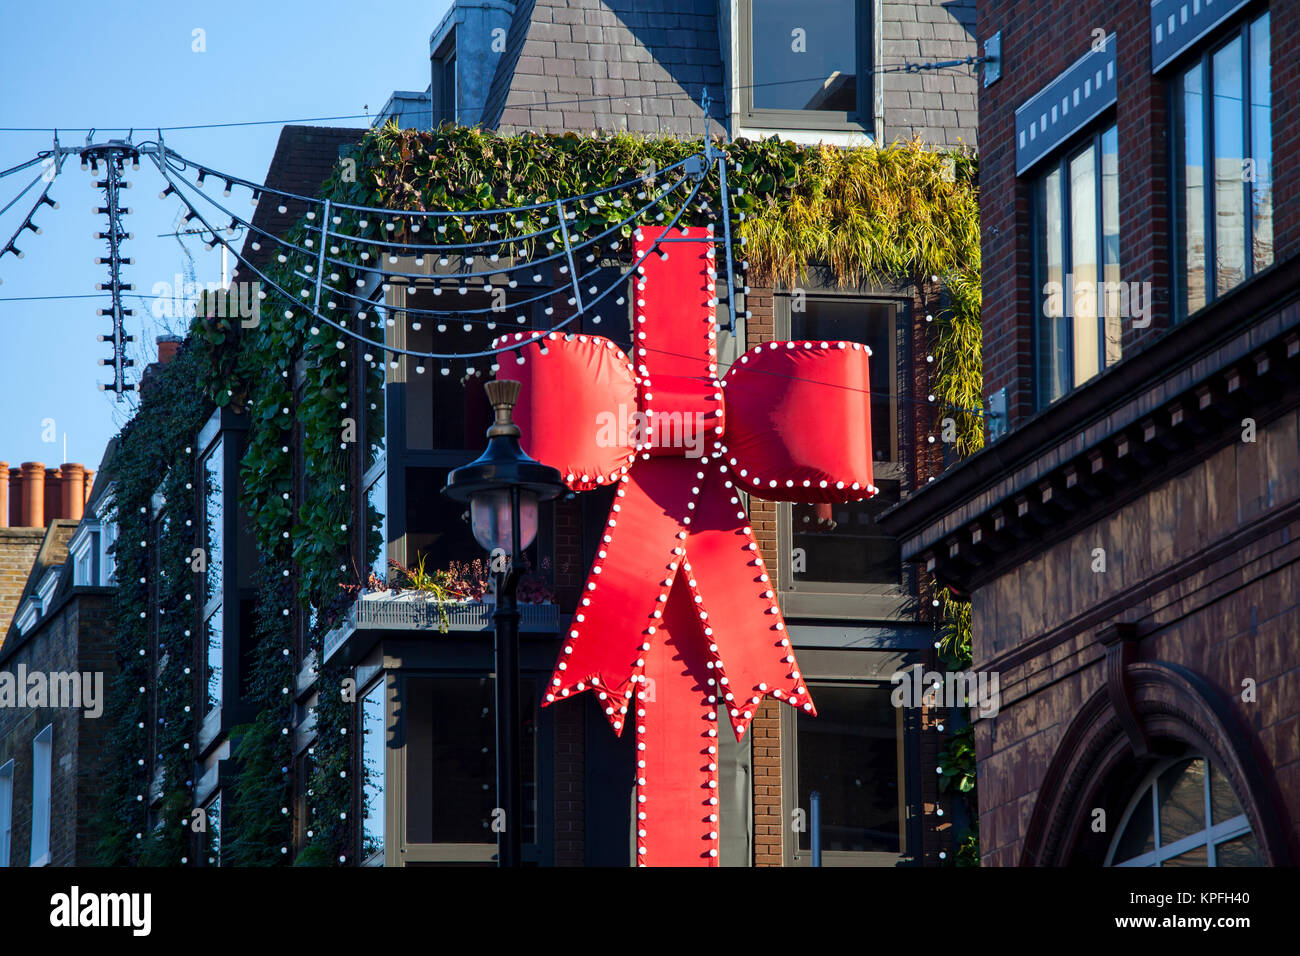 LONDON, UNITED KINGDOM - DECEMBER 12th, 2017: Christmas decoration are placed on the building around Covent Garden. Stock Photo